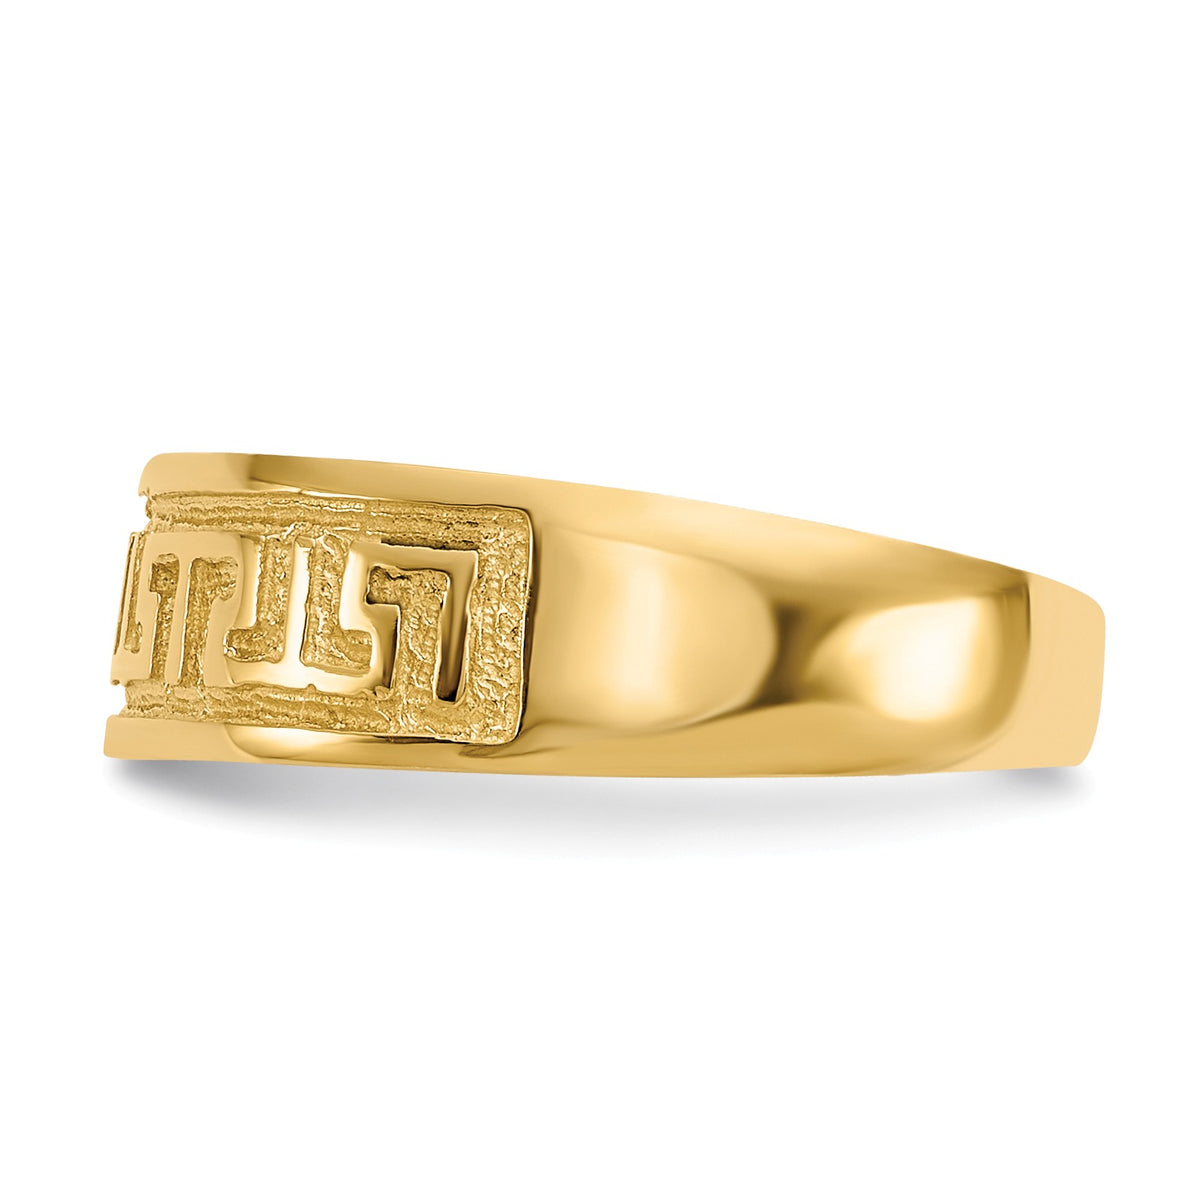 Alternate view of the Greek Design Key Toe Ring in 14K Yellow Gold by The Black Bow Jewelry Co.